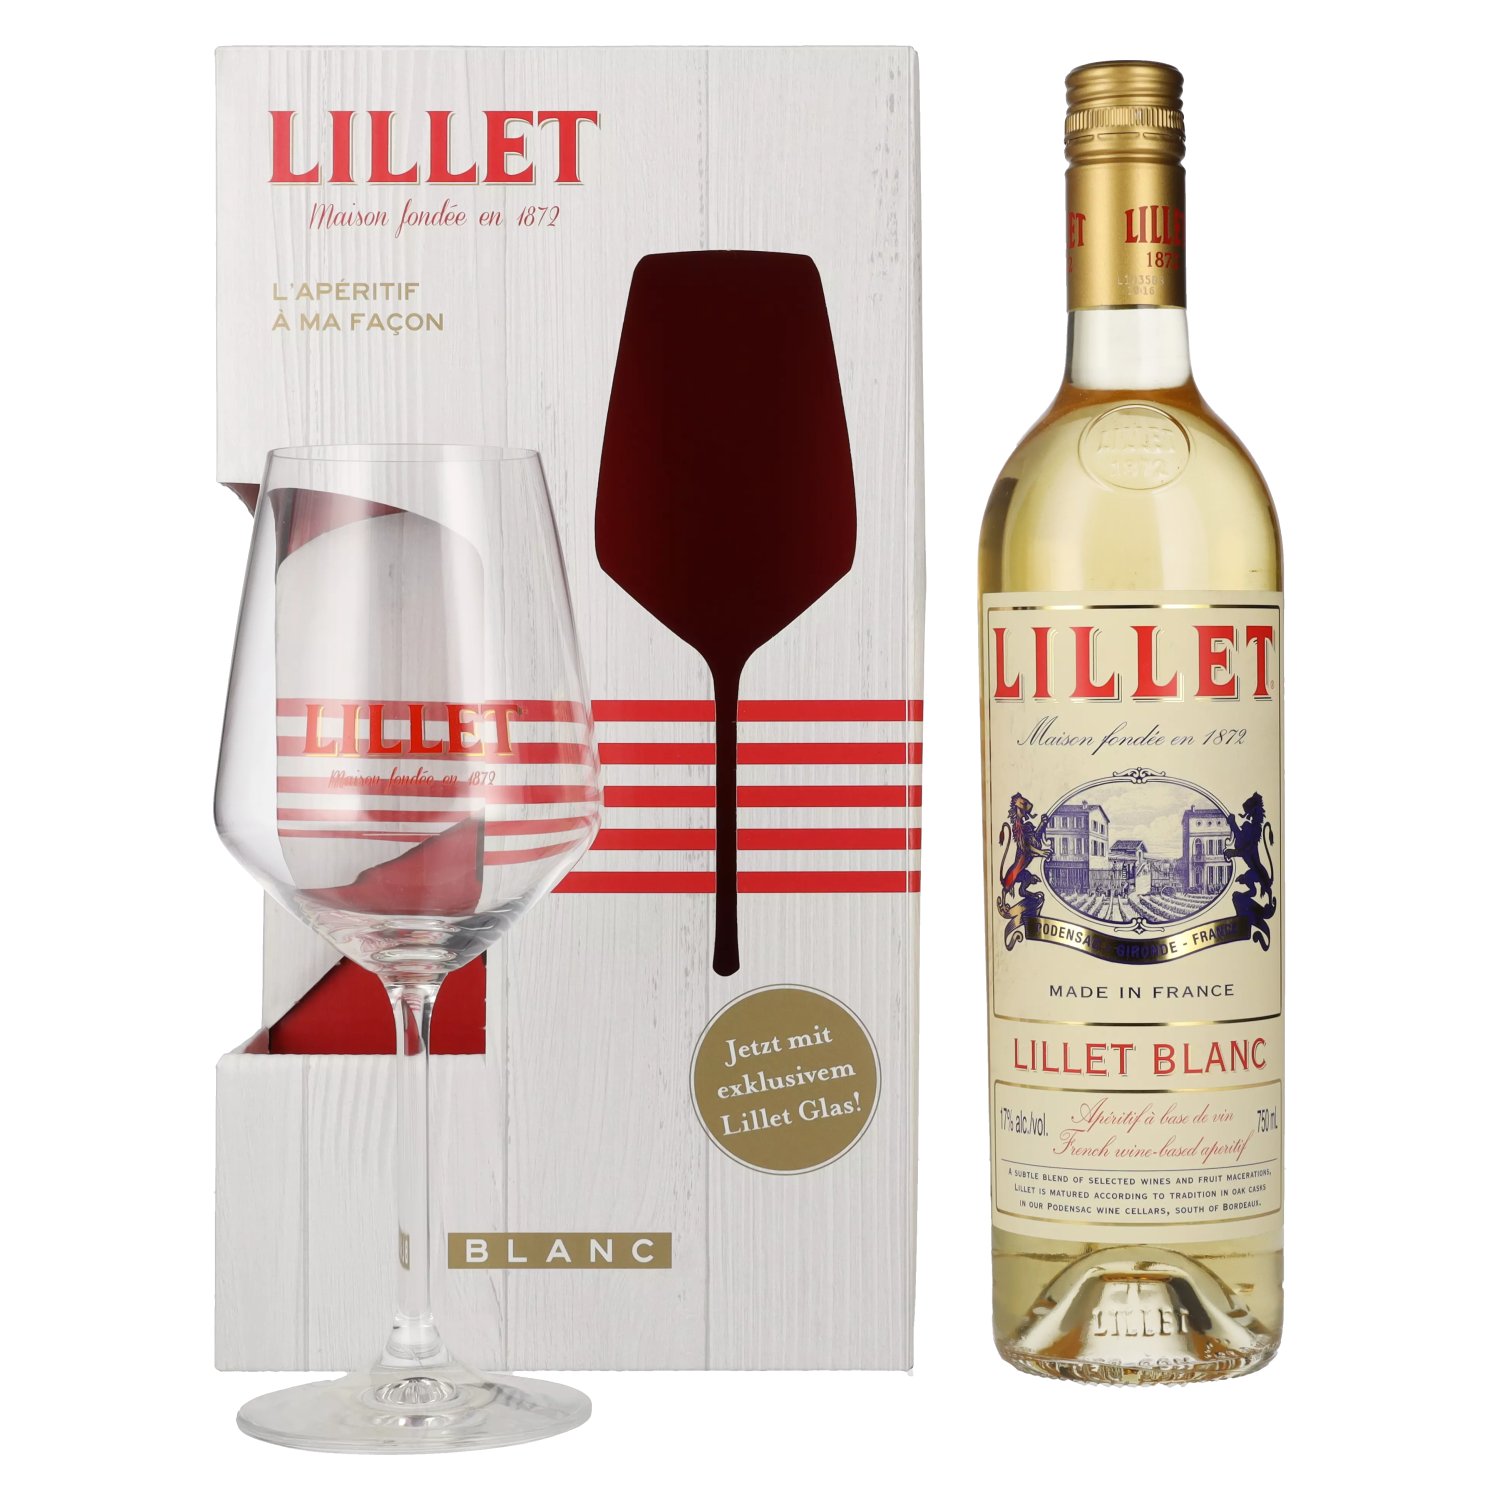 Lillet Blanc 17% Vol. 0,75l with Giftbox glass in